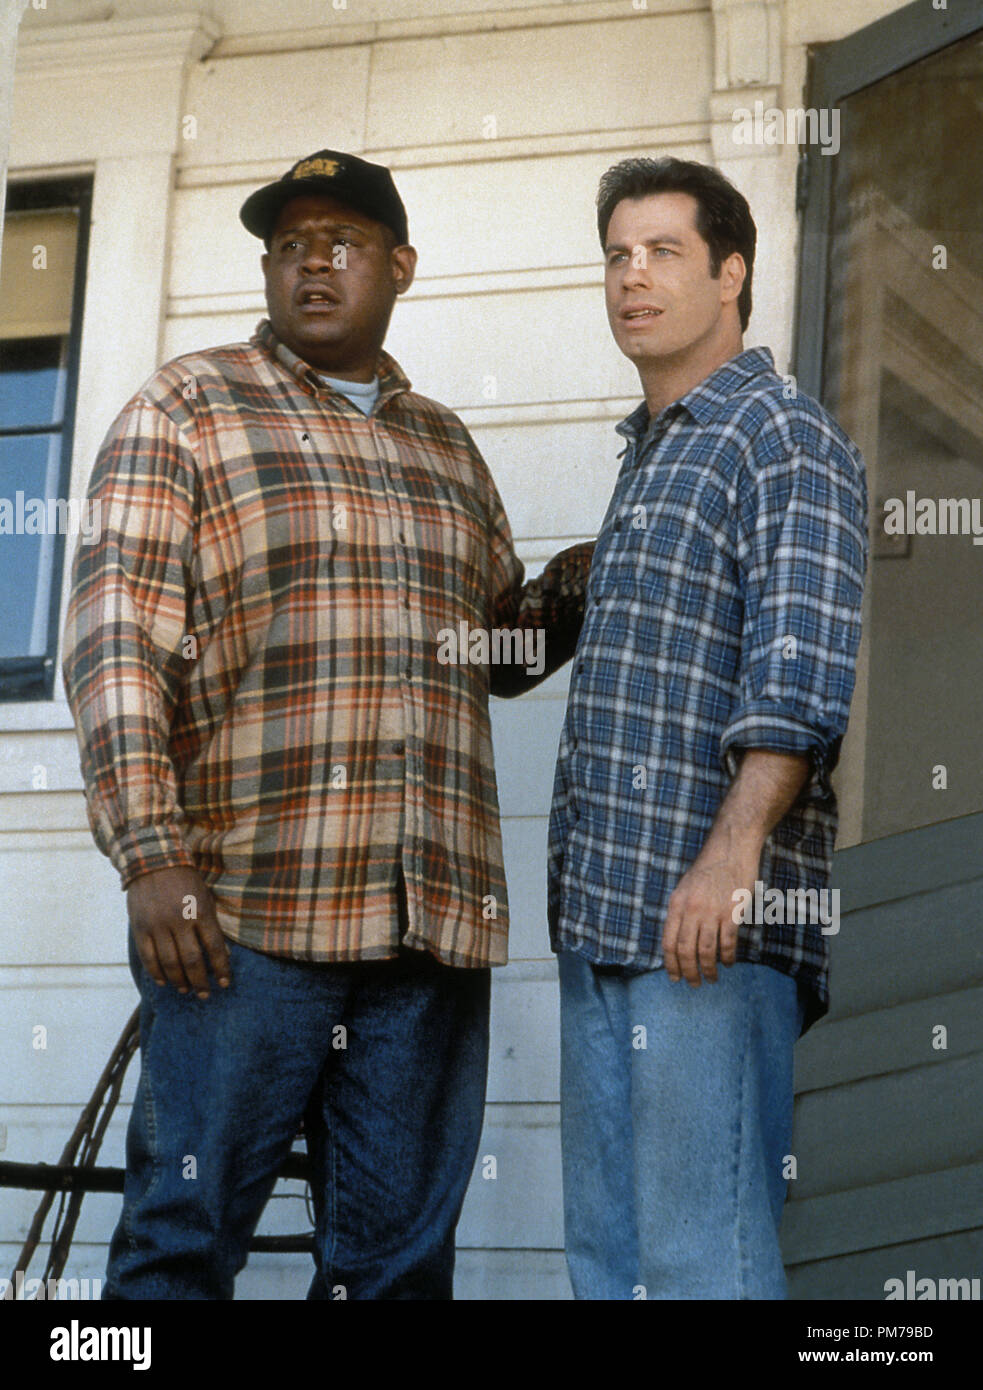 Film Still from 'Phenomenon' Forest Whitaker, John Travolta © 1996 Touchstone Pictures Photo Credit: Zade Rosenthal  File Reference # 31042304THA  For Editorial Use Only - All Rights Reserved Stock Photo